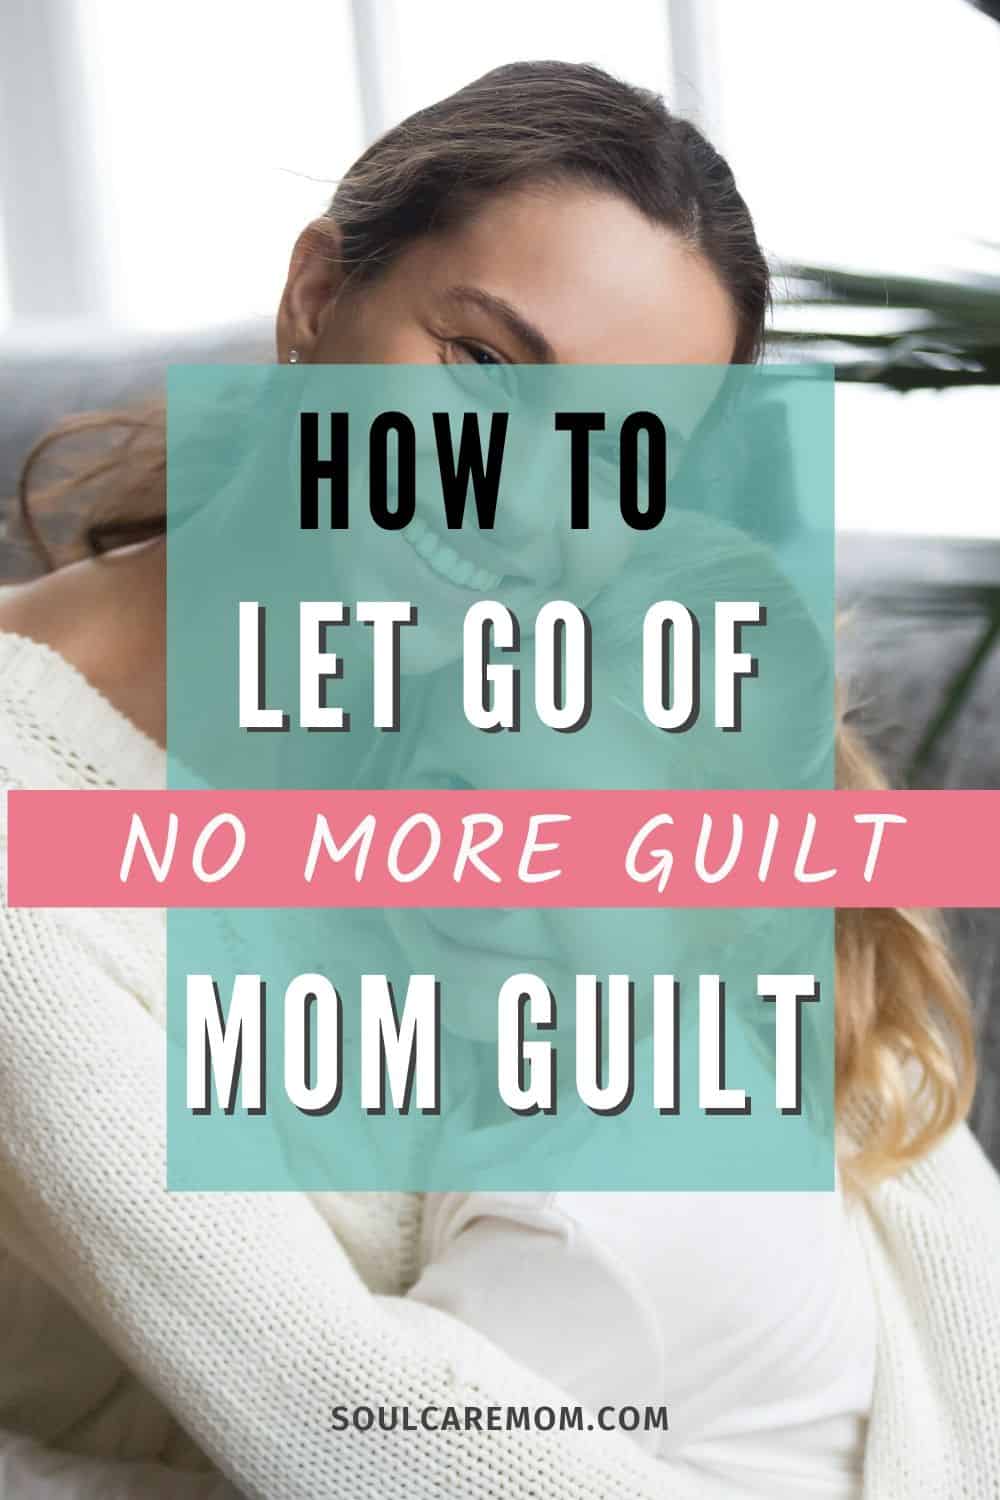 Good Mom - Loving Your Imperfections - No More Mom Guilt - Soul Care Mom - Pinterest